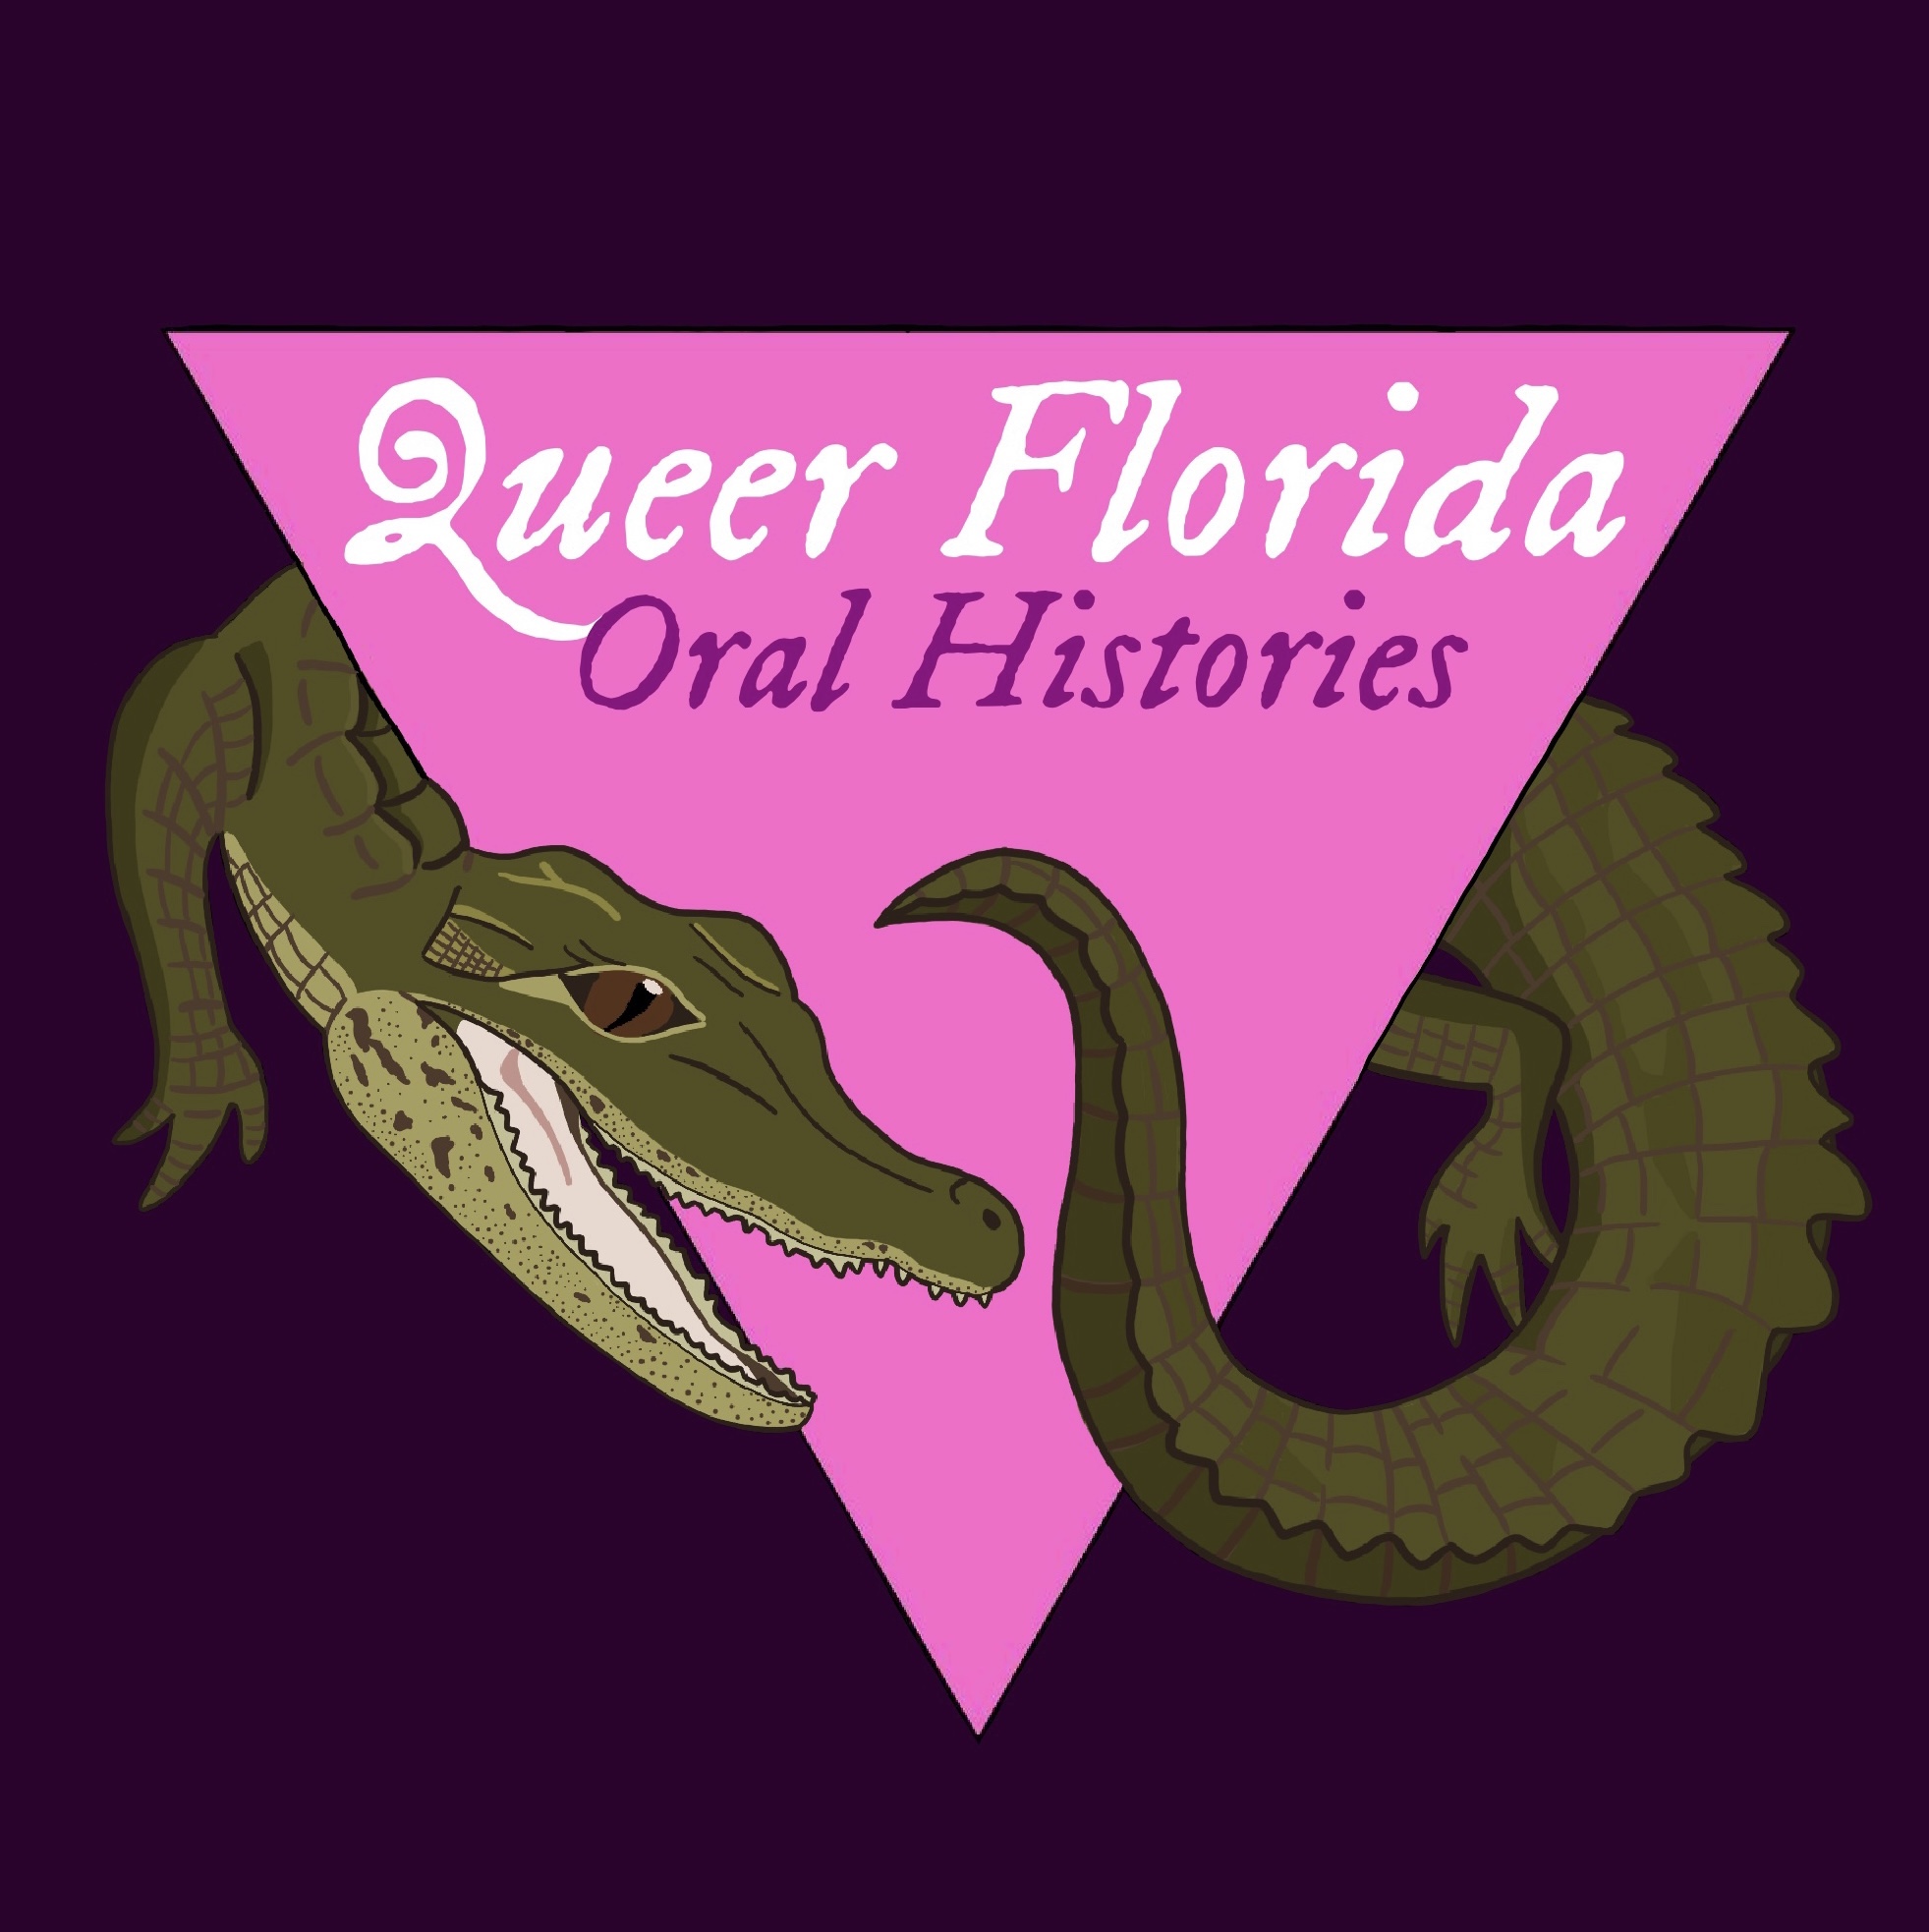 An illustration of a caiman curling around a pink triangle, set against a deep purple background, containing the text Queer Florida Oral Histories. Illustration by Han Powell.